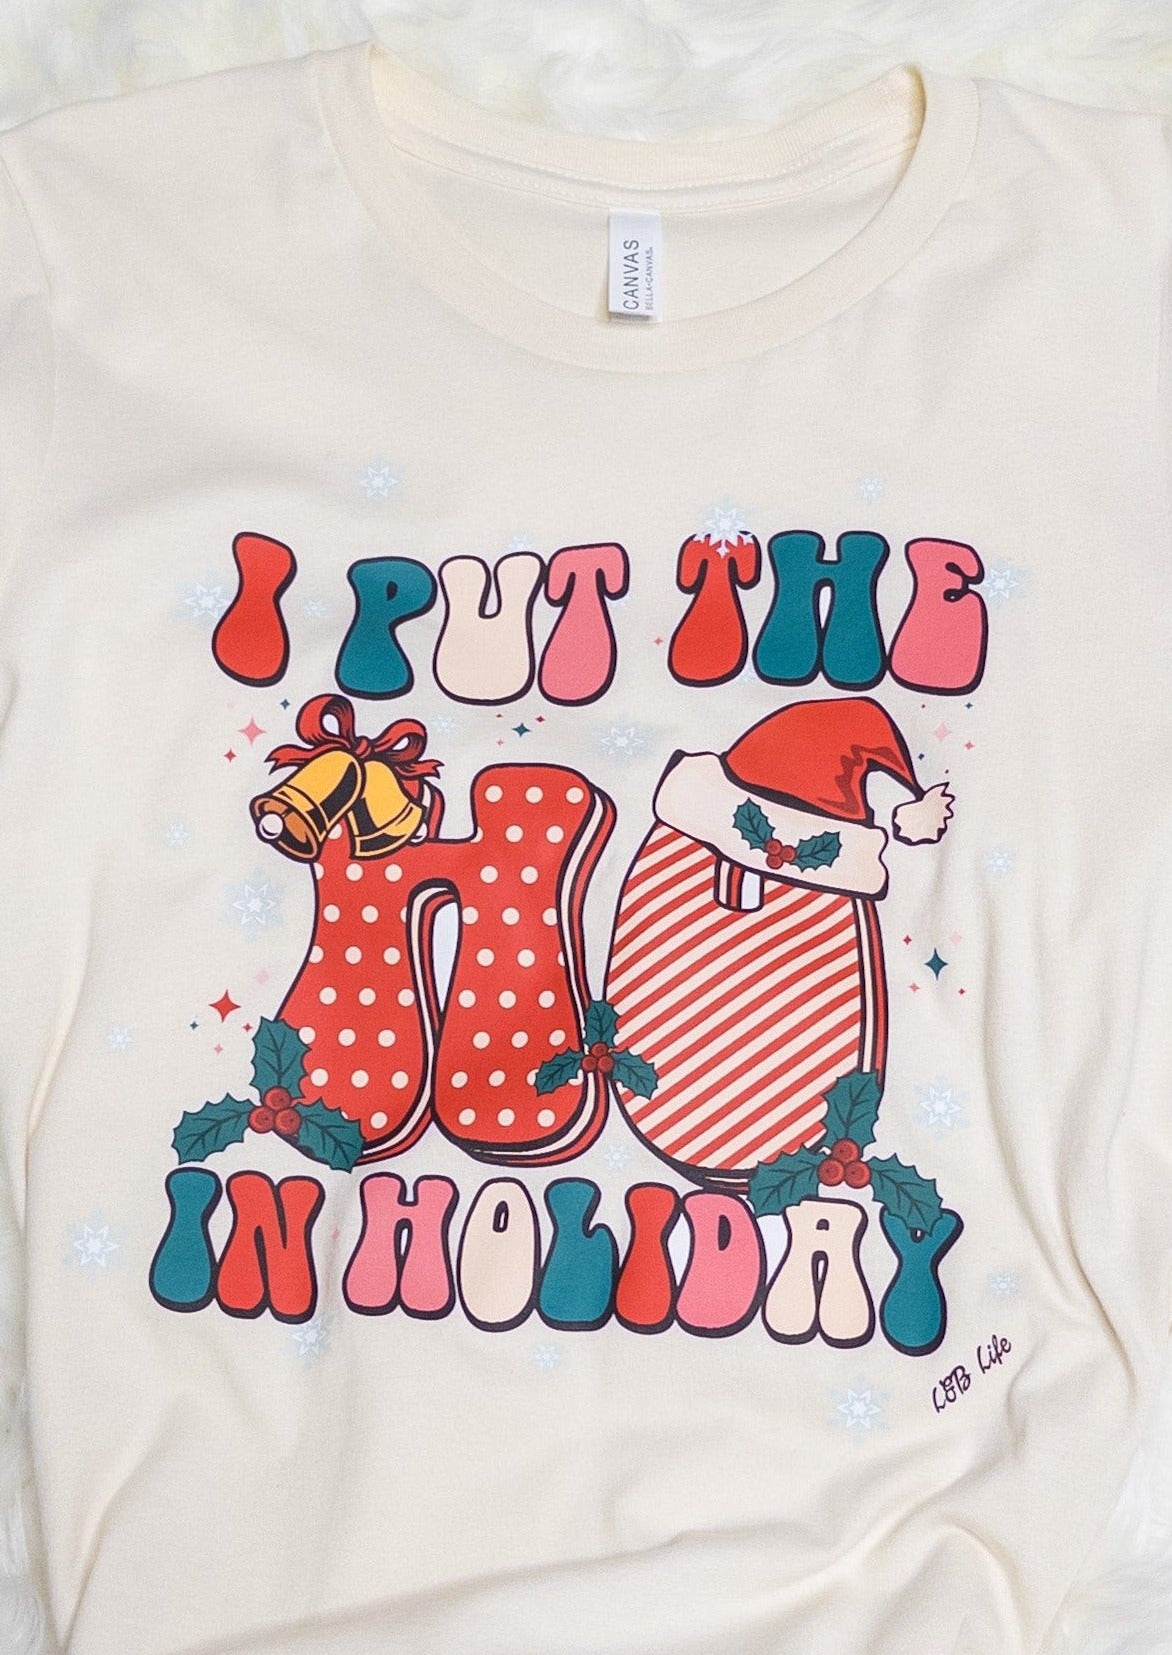 Cream colored tee shirt that says "I put the ho in holiday".  Festive red and green bubble writing, boughs of holly, a santa hat, and 2 bells tied with ribbon.